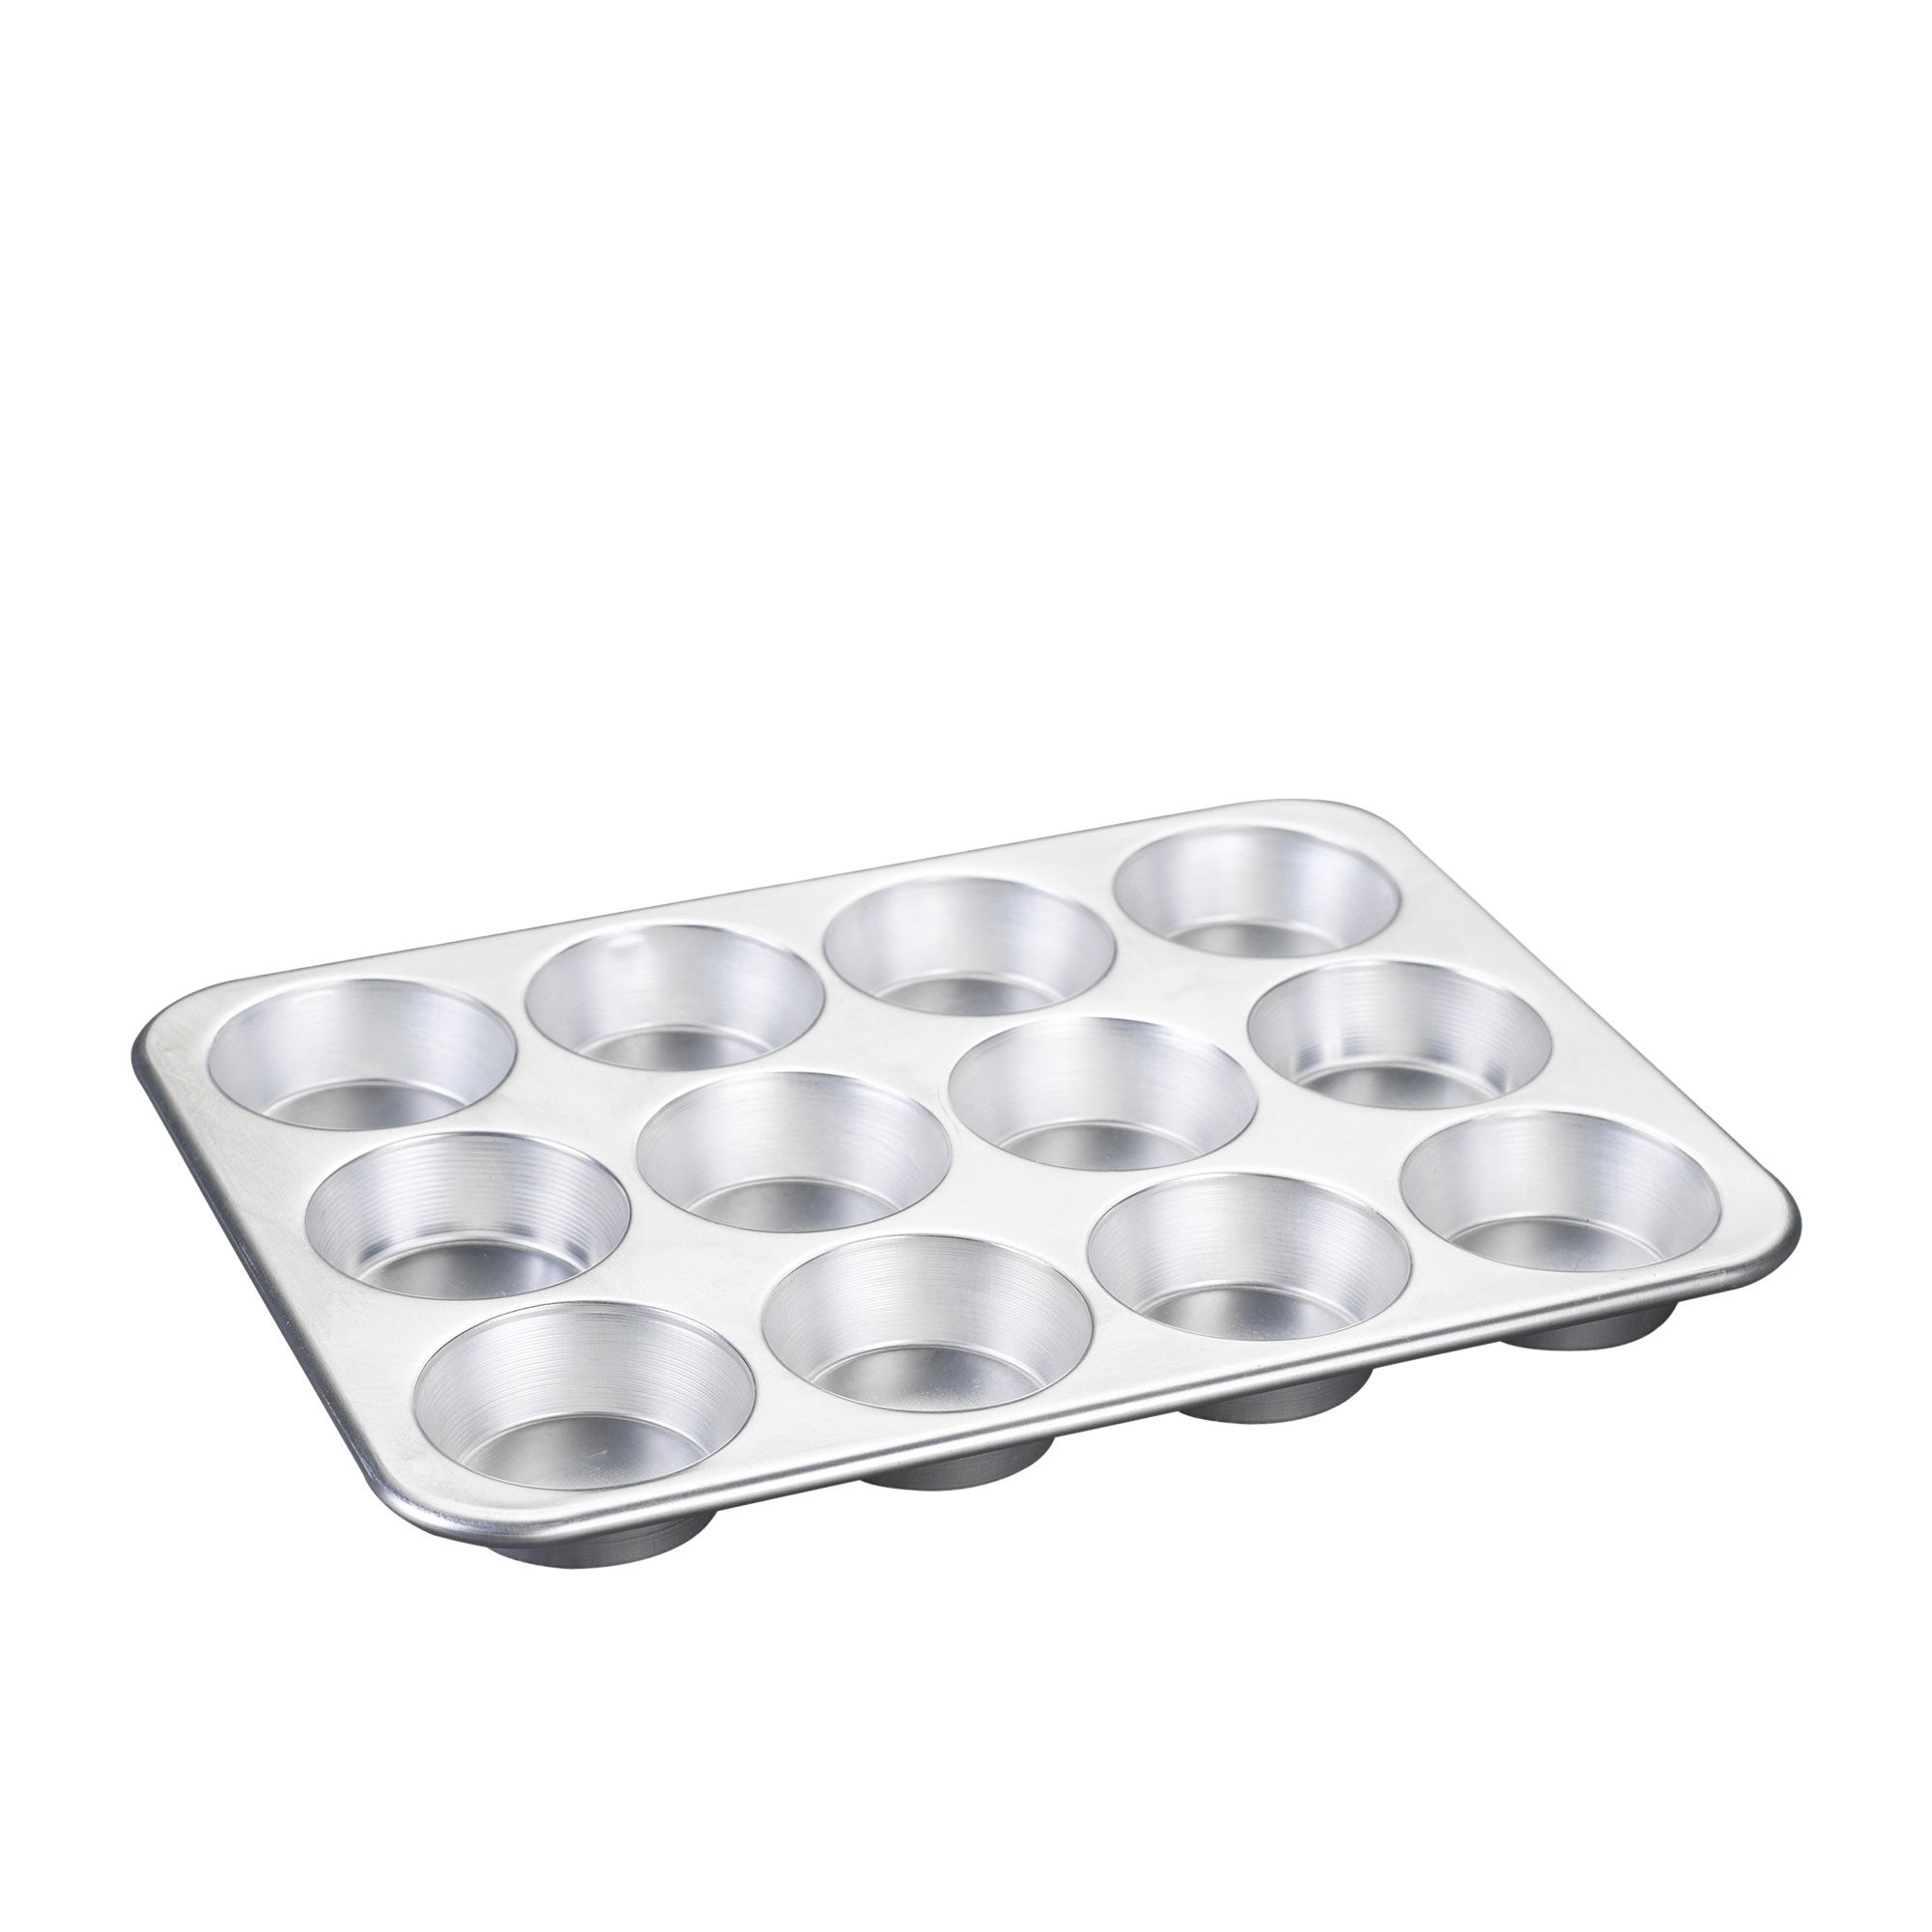 Nordic Ware Naturals Muffin Pan with High Dome Lid 12 Cup Image 1